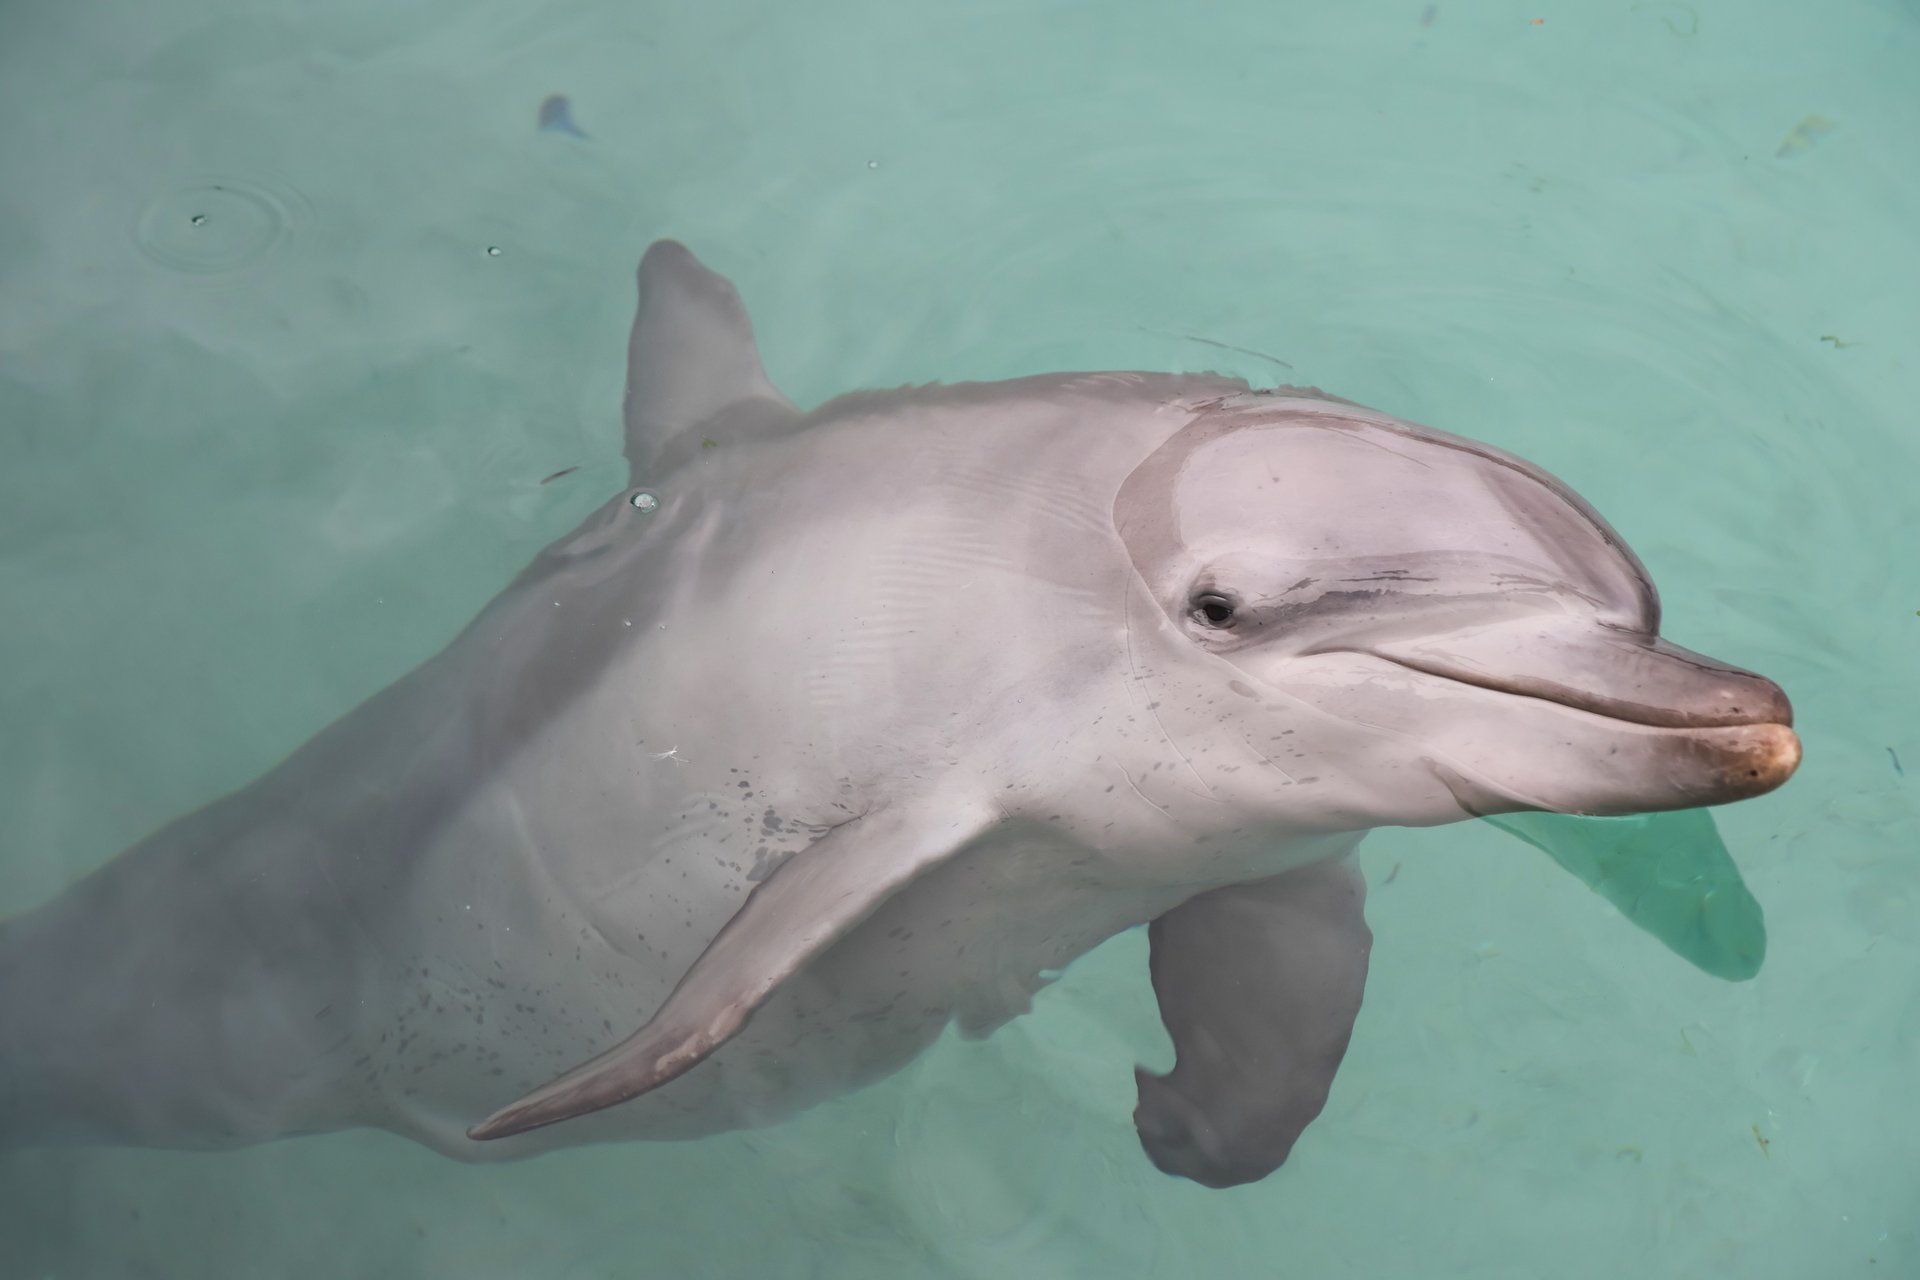 A captive dolphin swimming in a barren tank with its head slightly out of the water and looking directly into the camera.